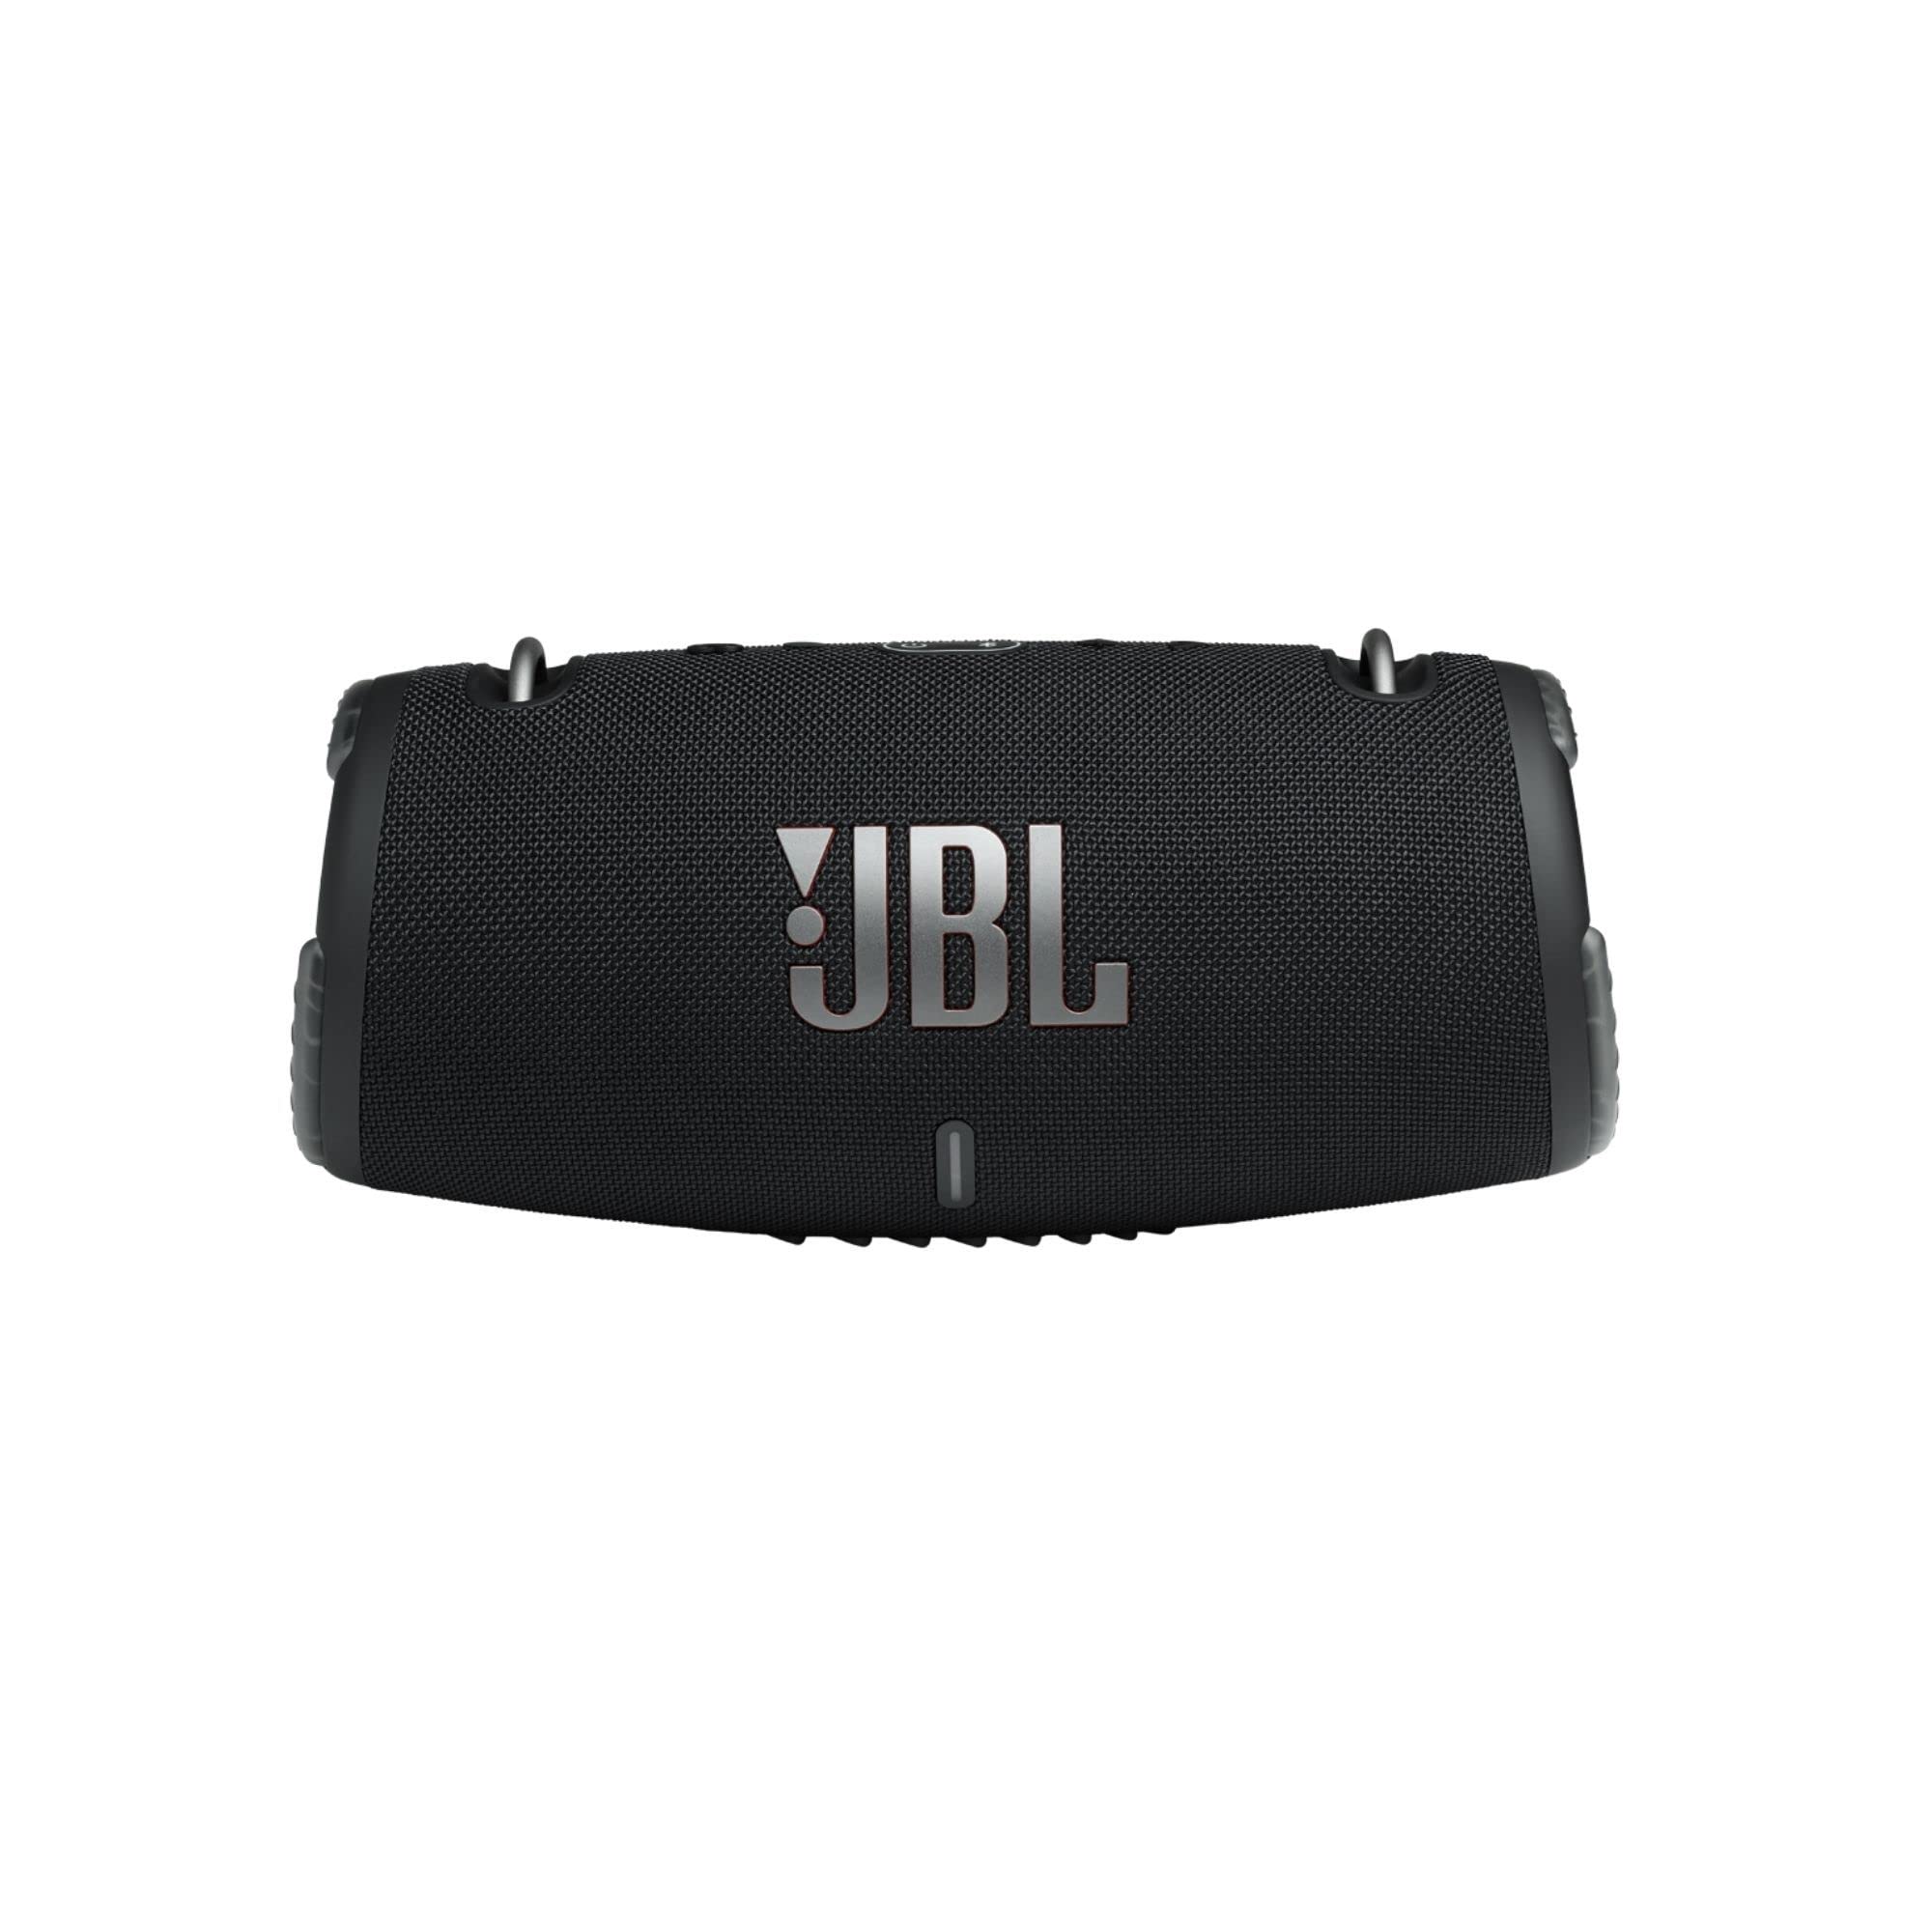 JBL Xtreme 3 - Portable Bluetooth Speaker with IP67 Wat...